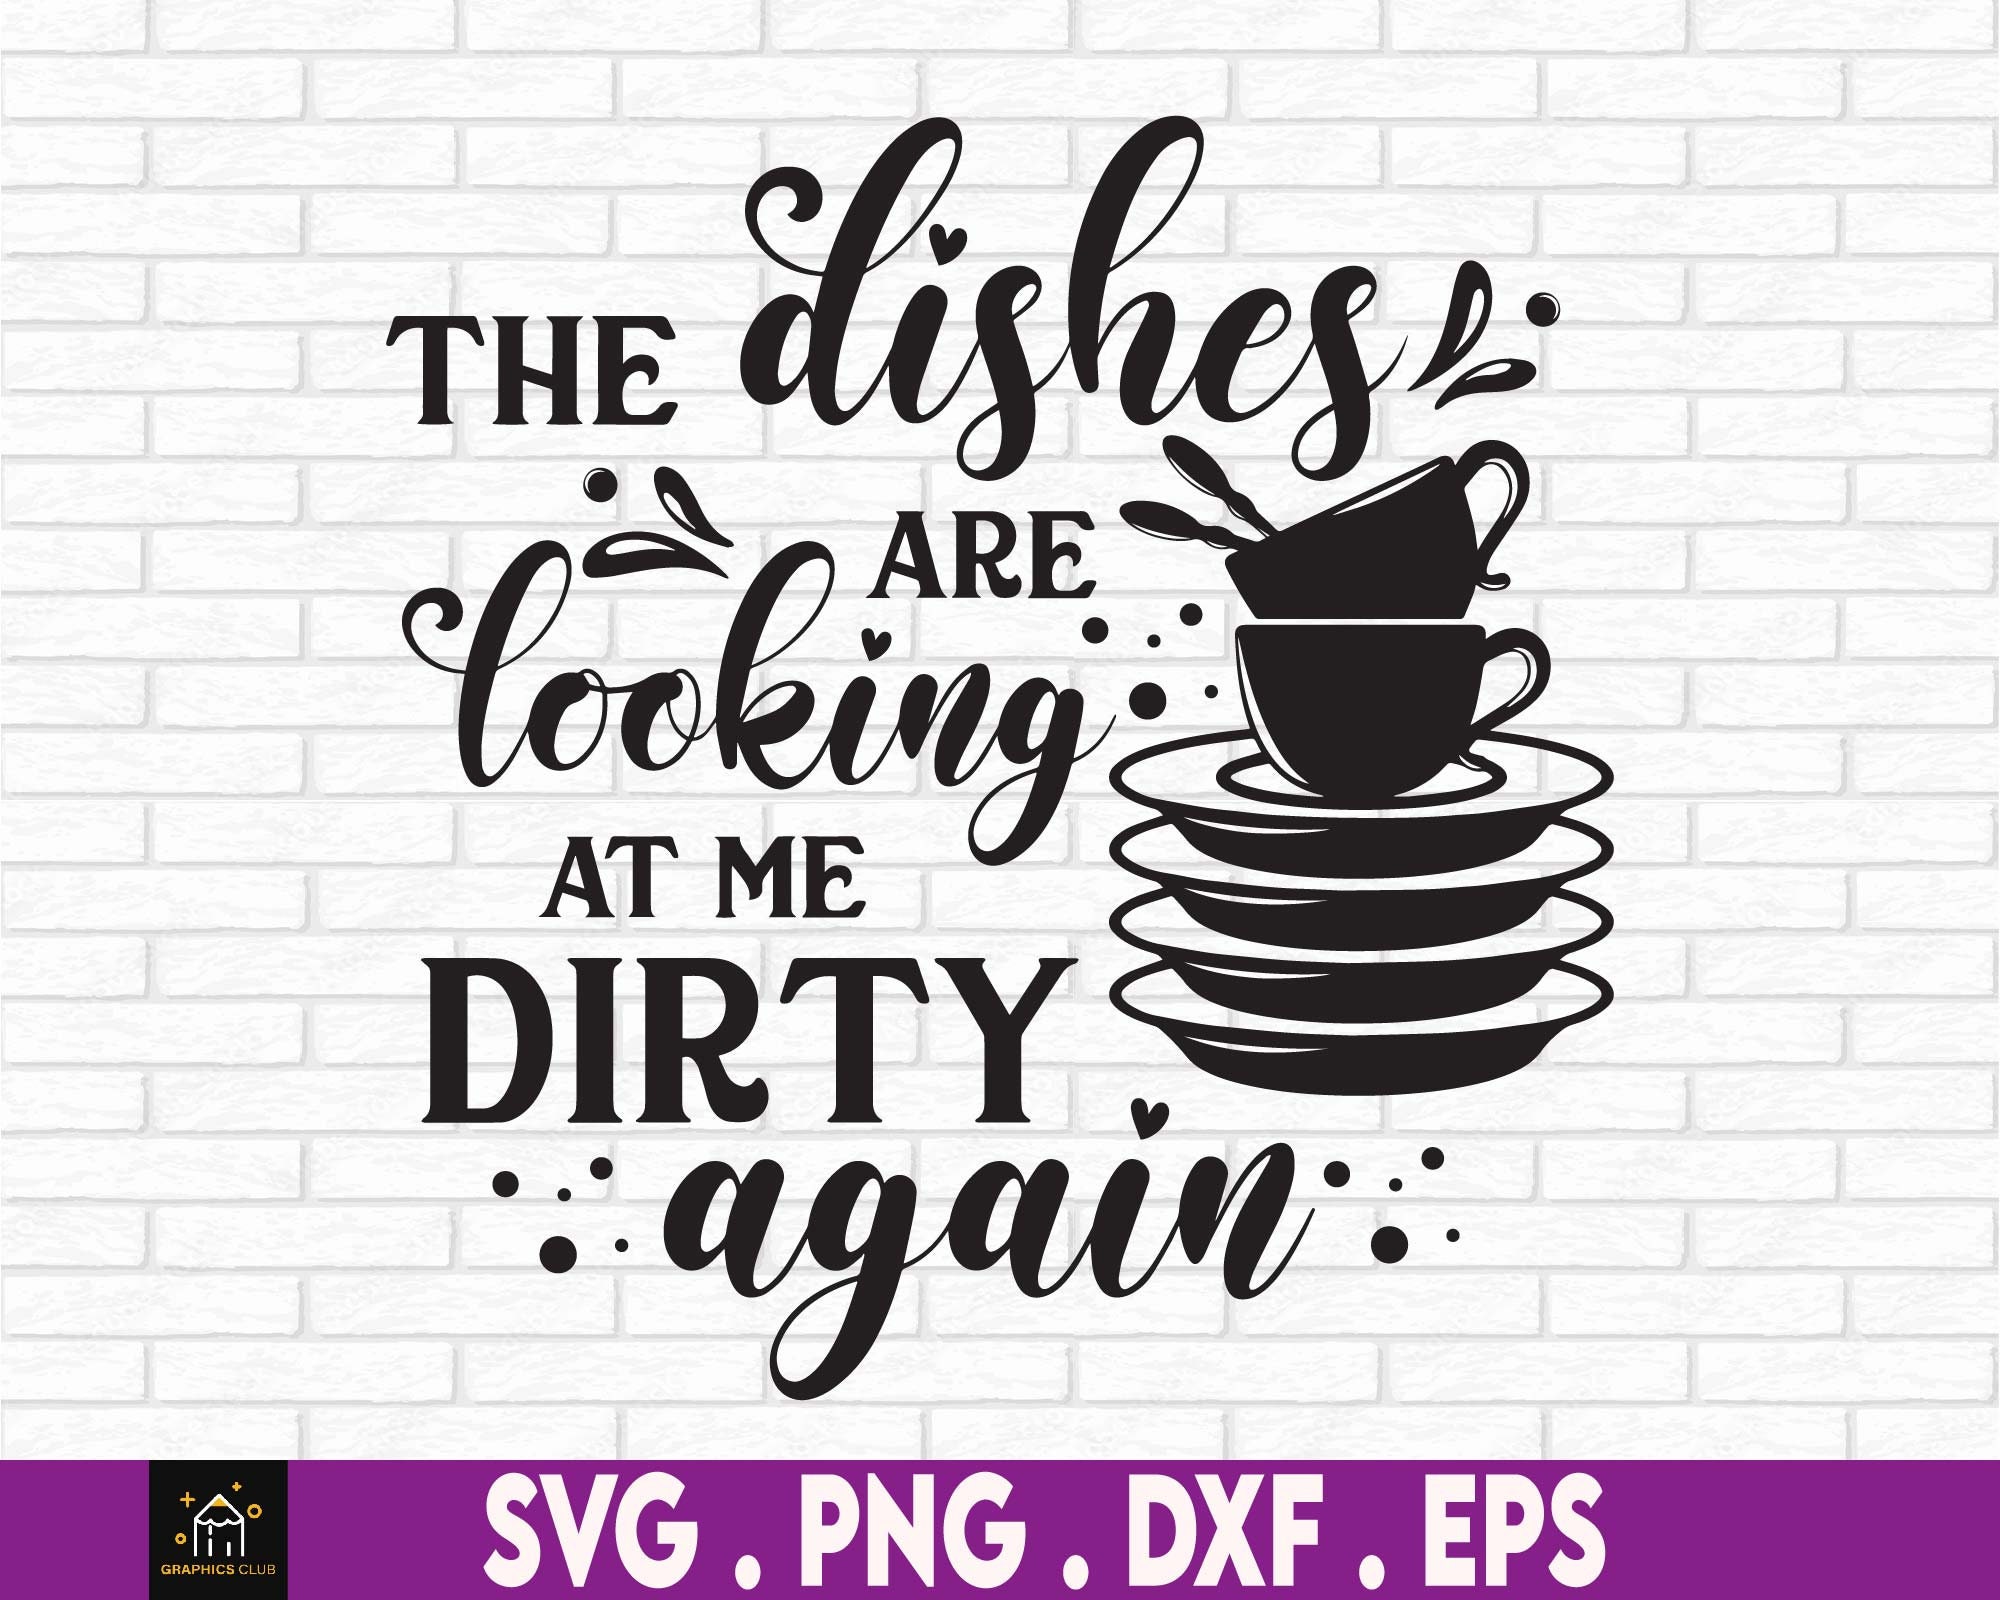 Stinky & Dirty, Stinky and Dirty, Stinky Dirty Show, Stinky and Dirty SVG,  Stinky and Dirty PNG, Stinky and Dirty Clip Art